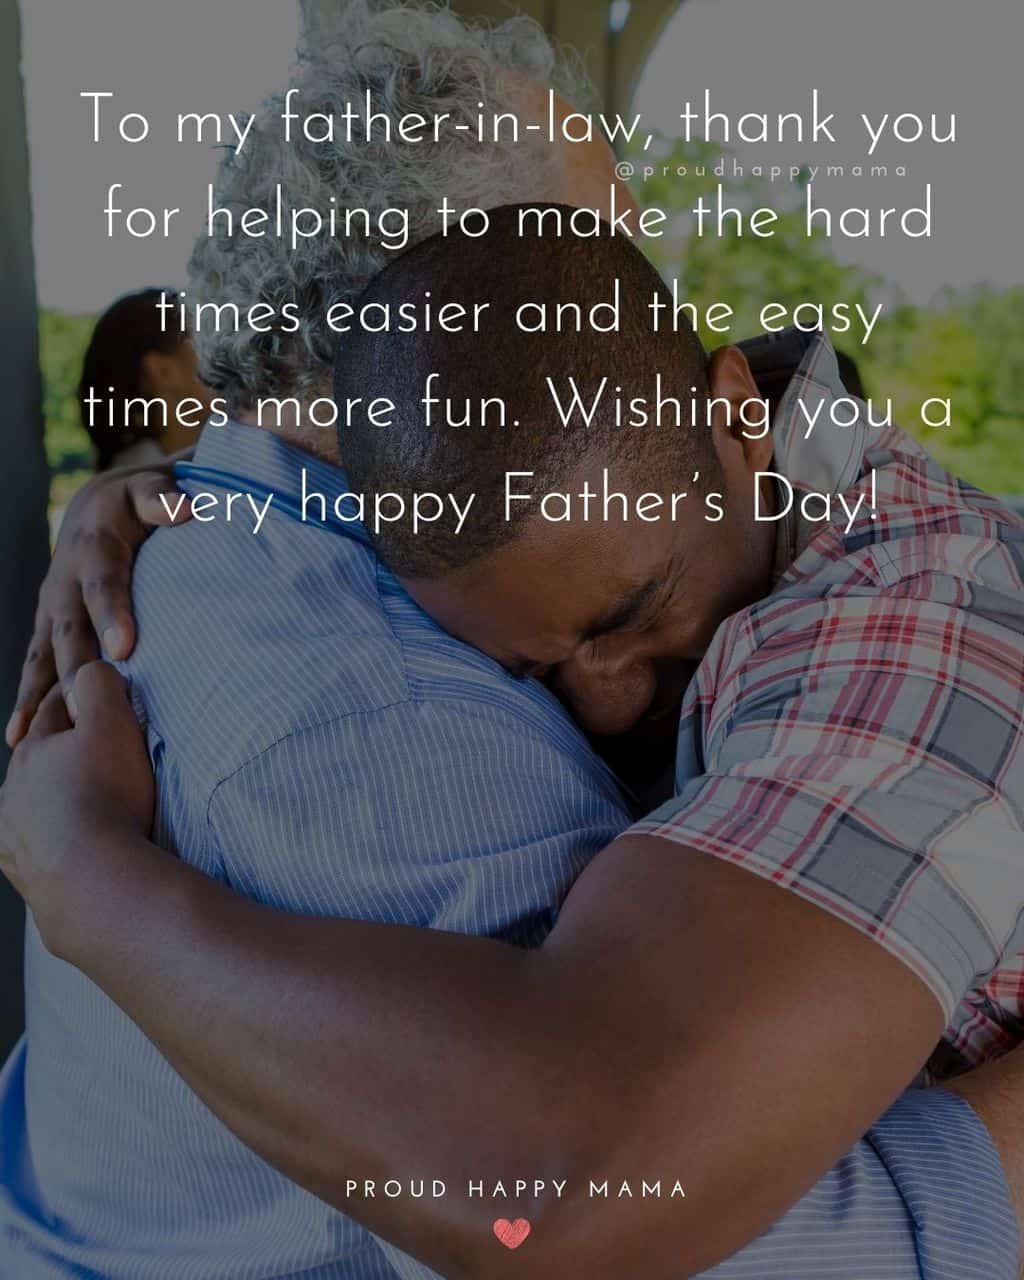 Happy Fathers Day Quotes For Father In Law - To my father in law, thank you for helping to make the hard times easier and the